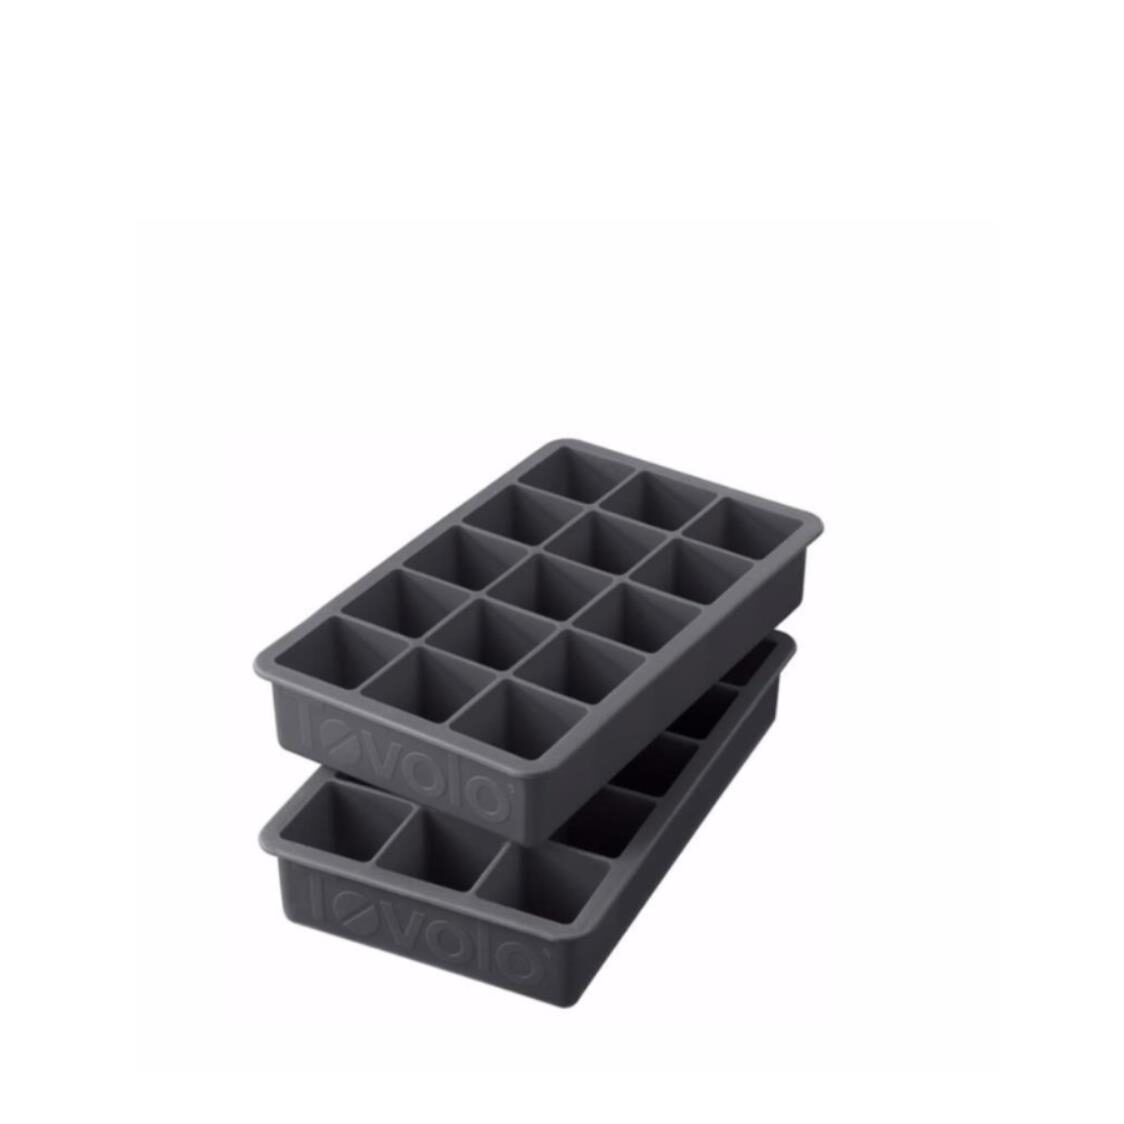 https://media.metro.sg/ProductImages/142334bd-7bae-40de-b86a-06b46ad94a9f/1/std/tovolo-perfect-cube-ice-trays-set-of-2-230707015632.jpg